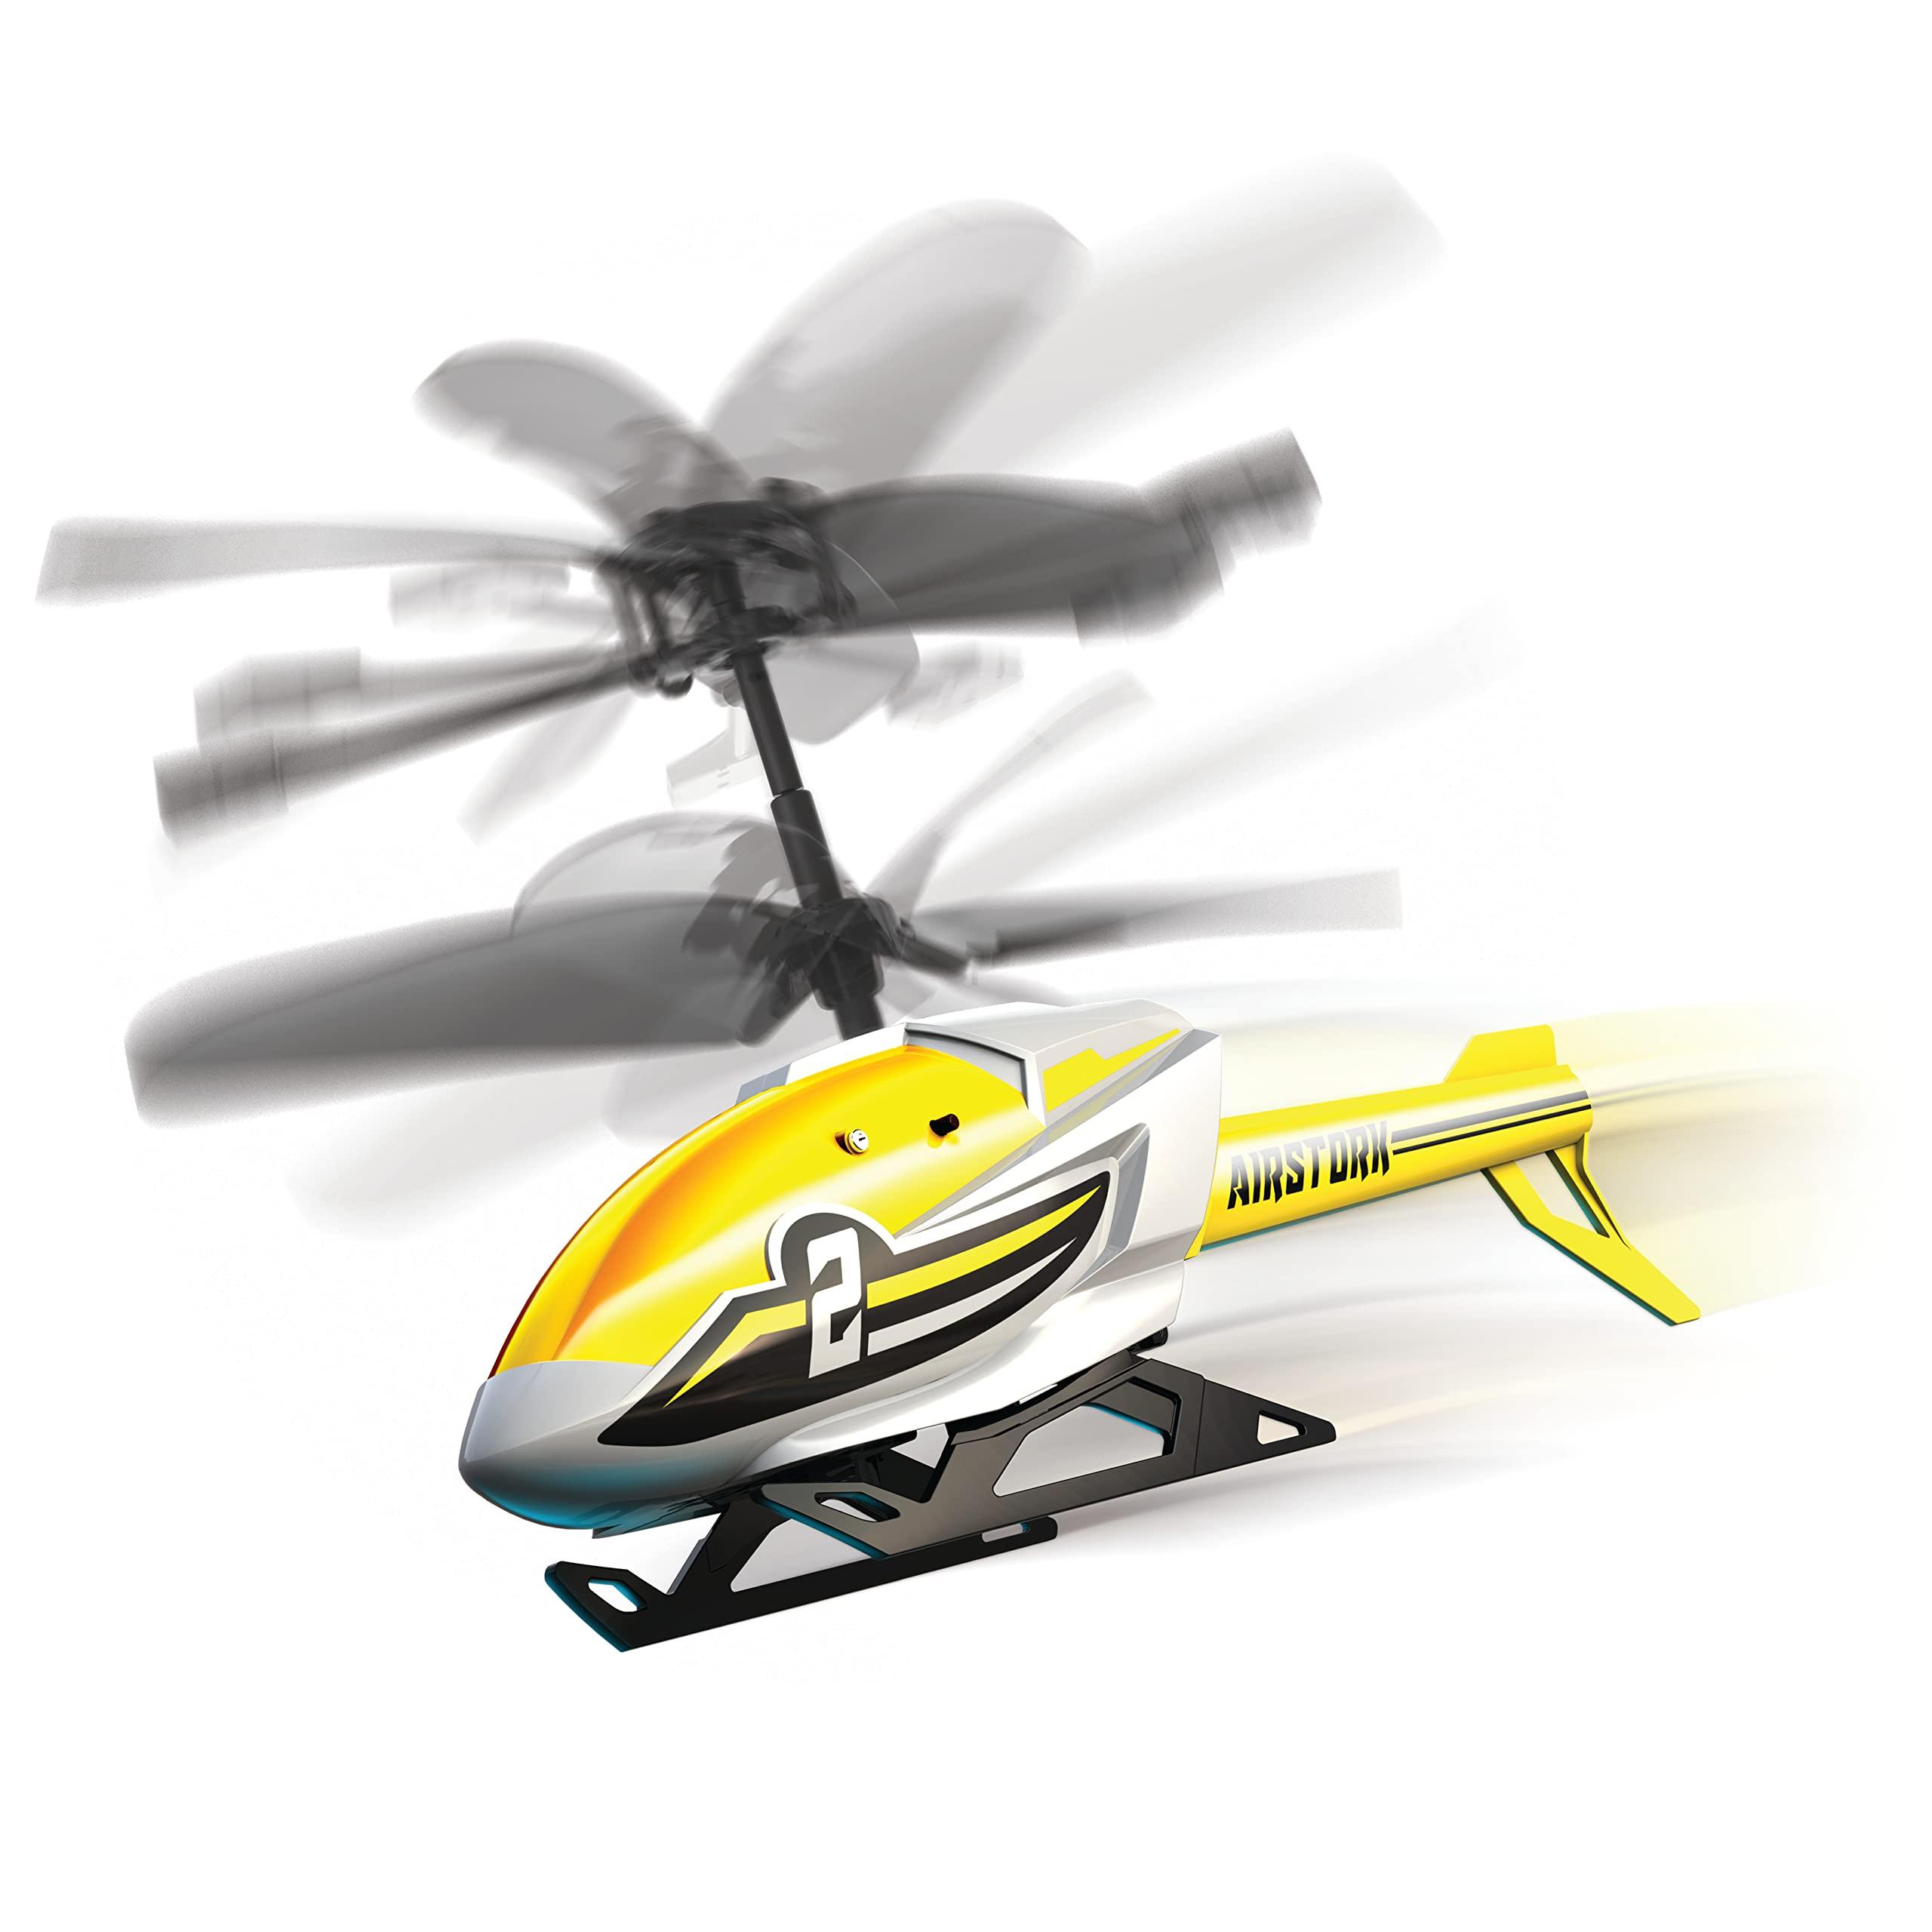 Silverlit Rc Helicopter: Valuable User Feedback on Silverlit RC Helicopter